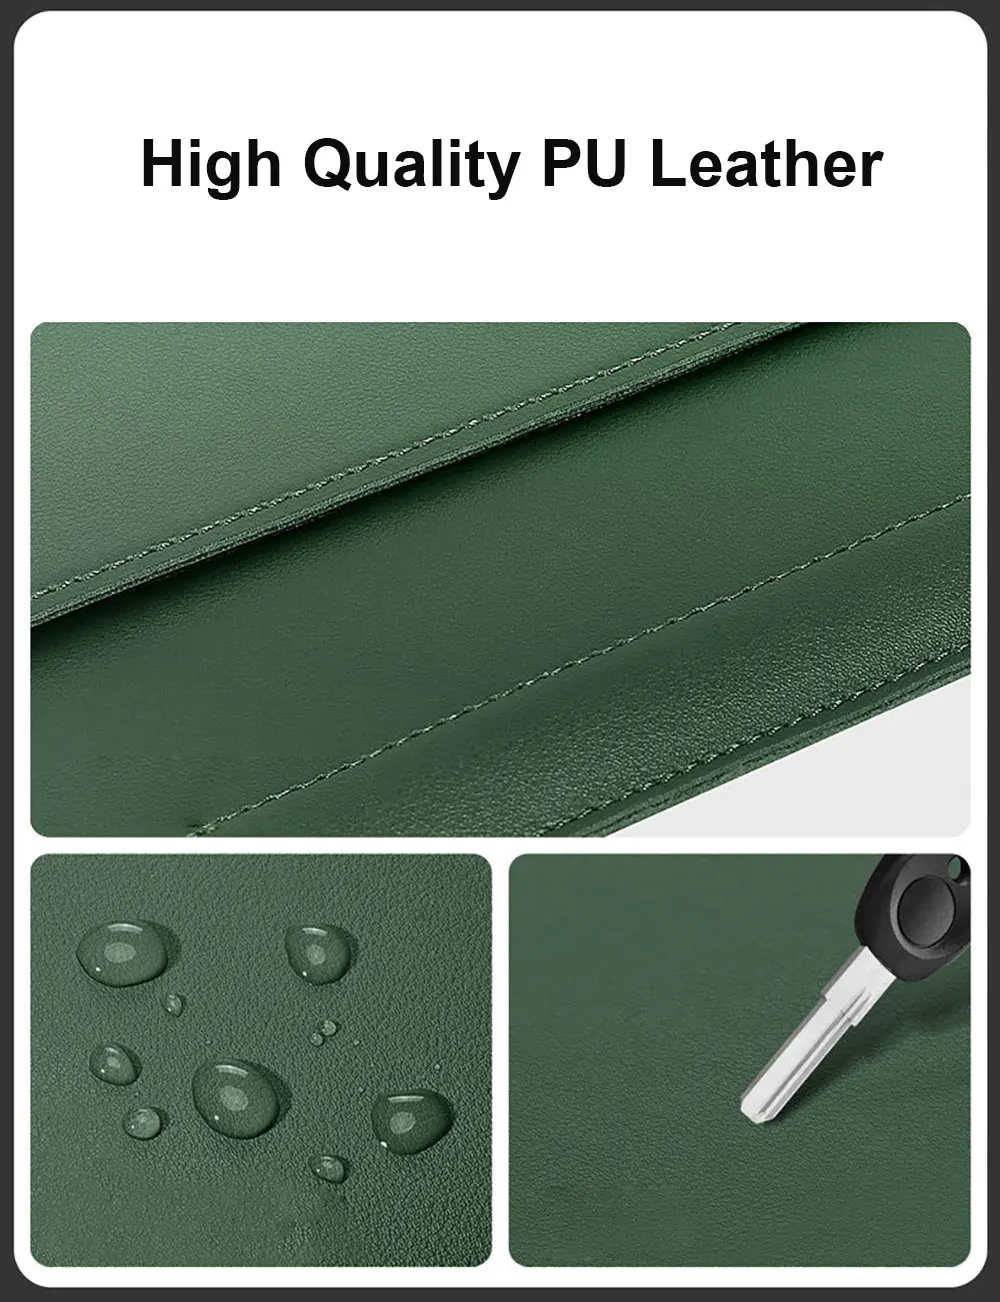 Pu Leather Bag Laptop Mouse Pad Adjustable Tablet Holder 3In1 Backpack Office Computer Luxury Handheld Stand Dnb28 Laudtec factory